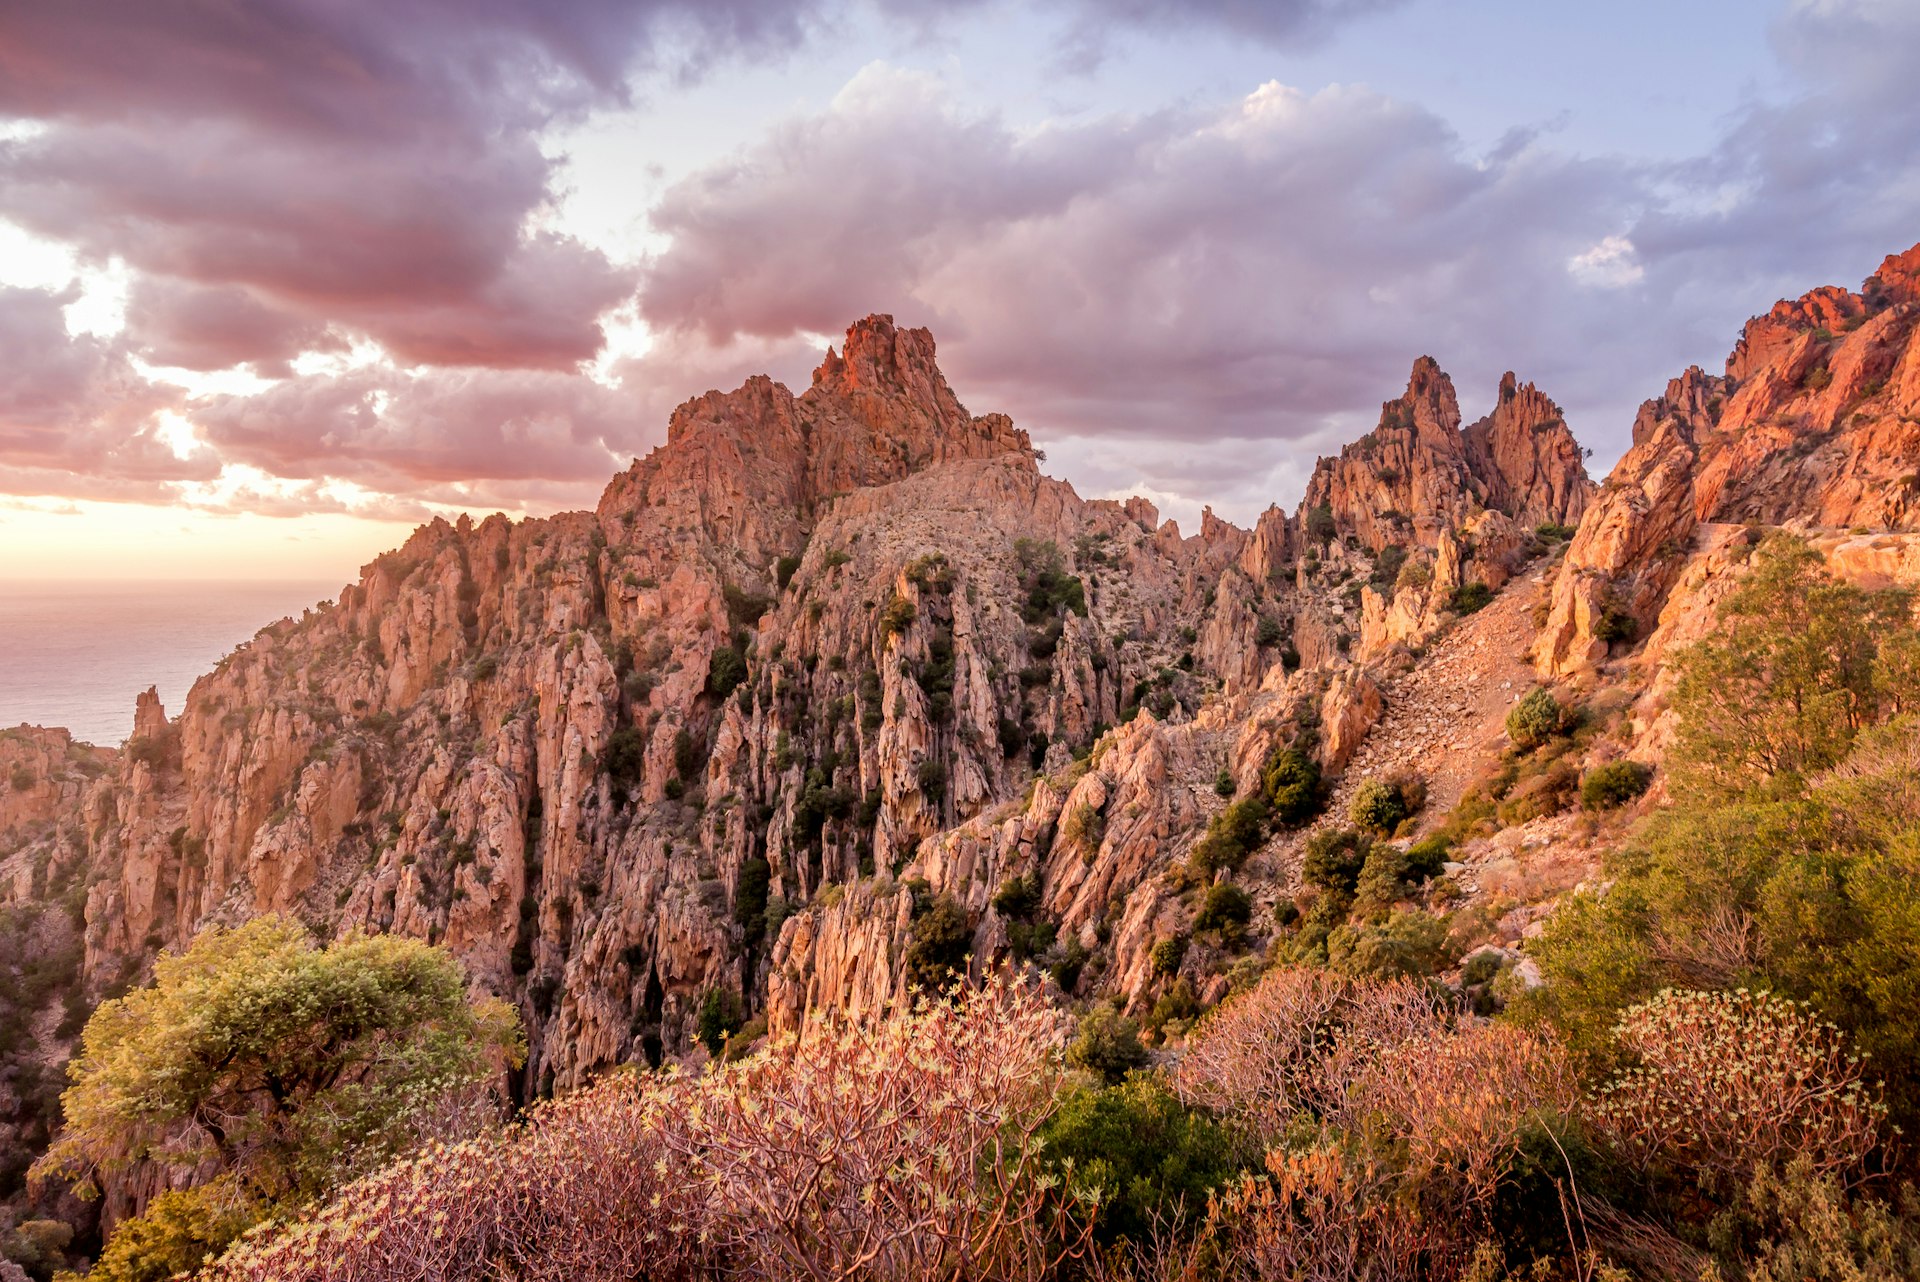 The calanques of Piana, amazing rock formations colored red at sunset in Corsic